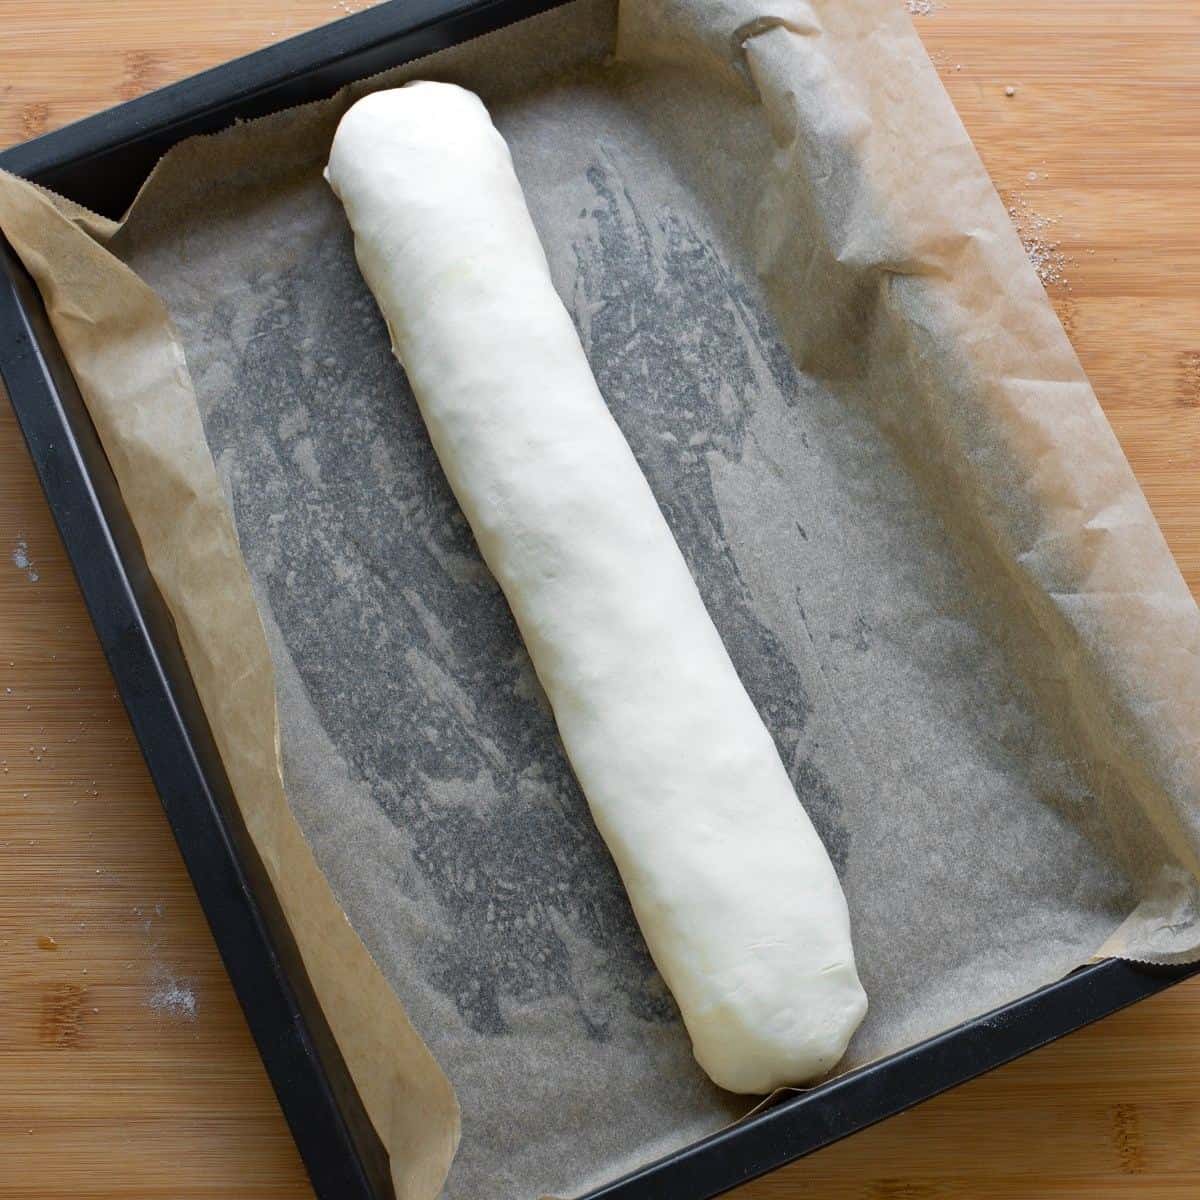 Rolled apple strudel on baking sheet, lined with parchment paper.